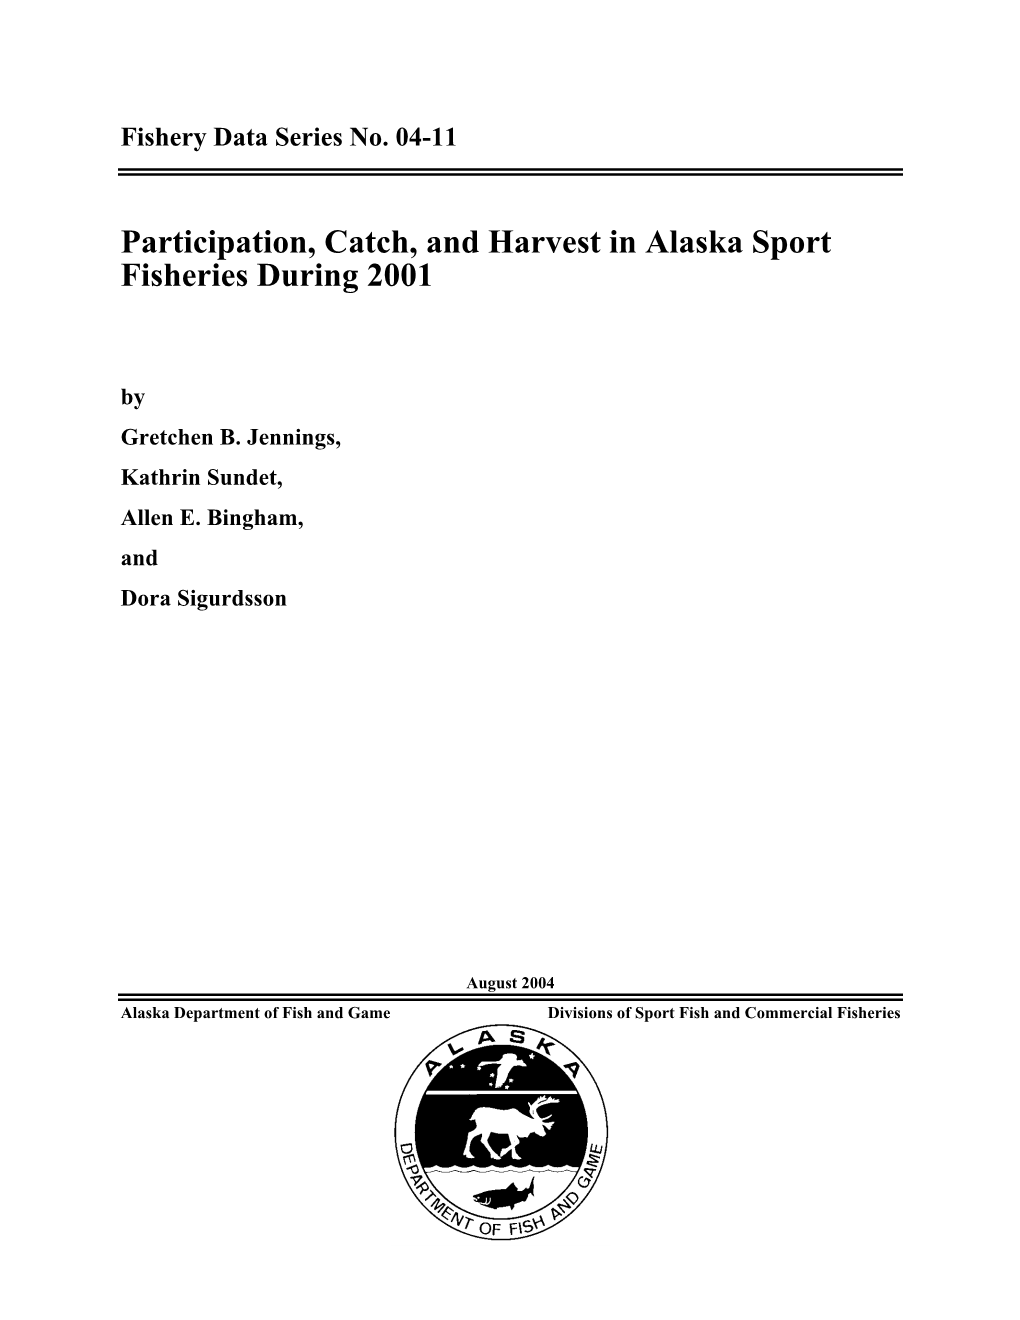 Participation, Catch, and Harvest in Alaska Sport Fisheries During 2001